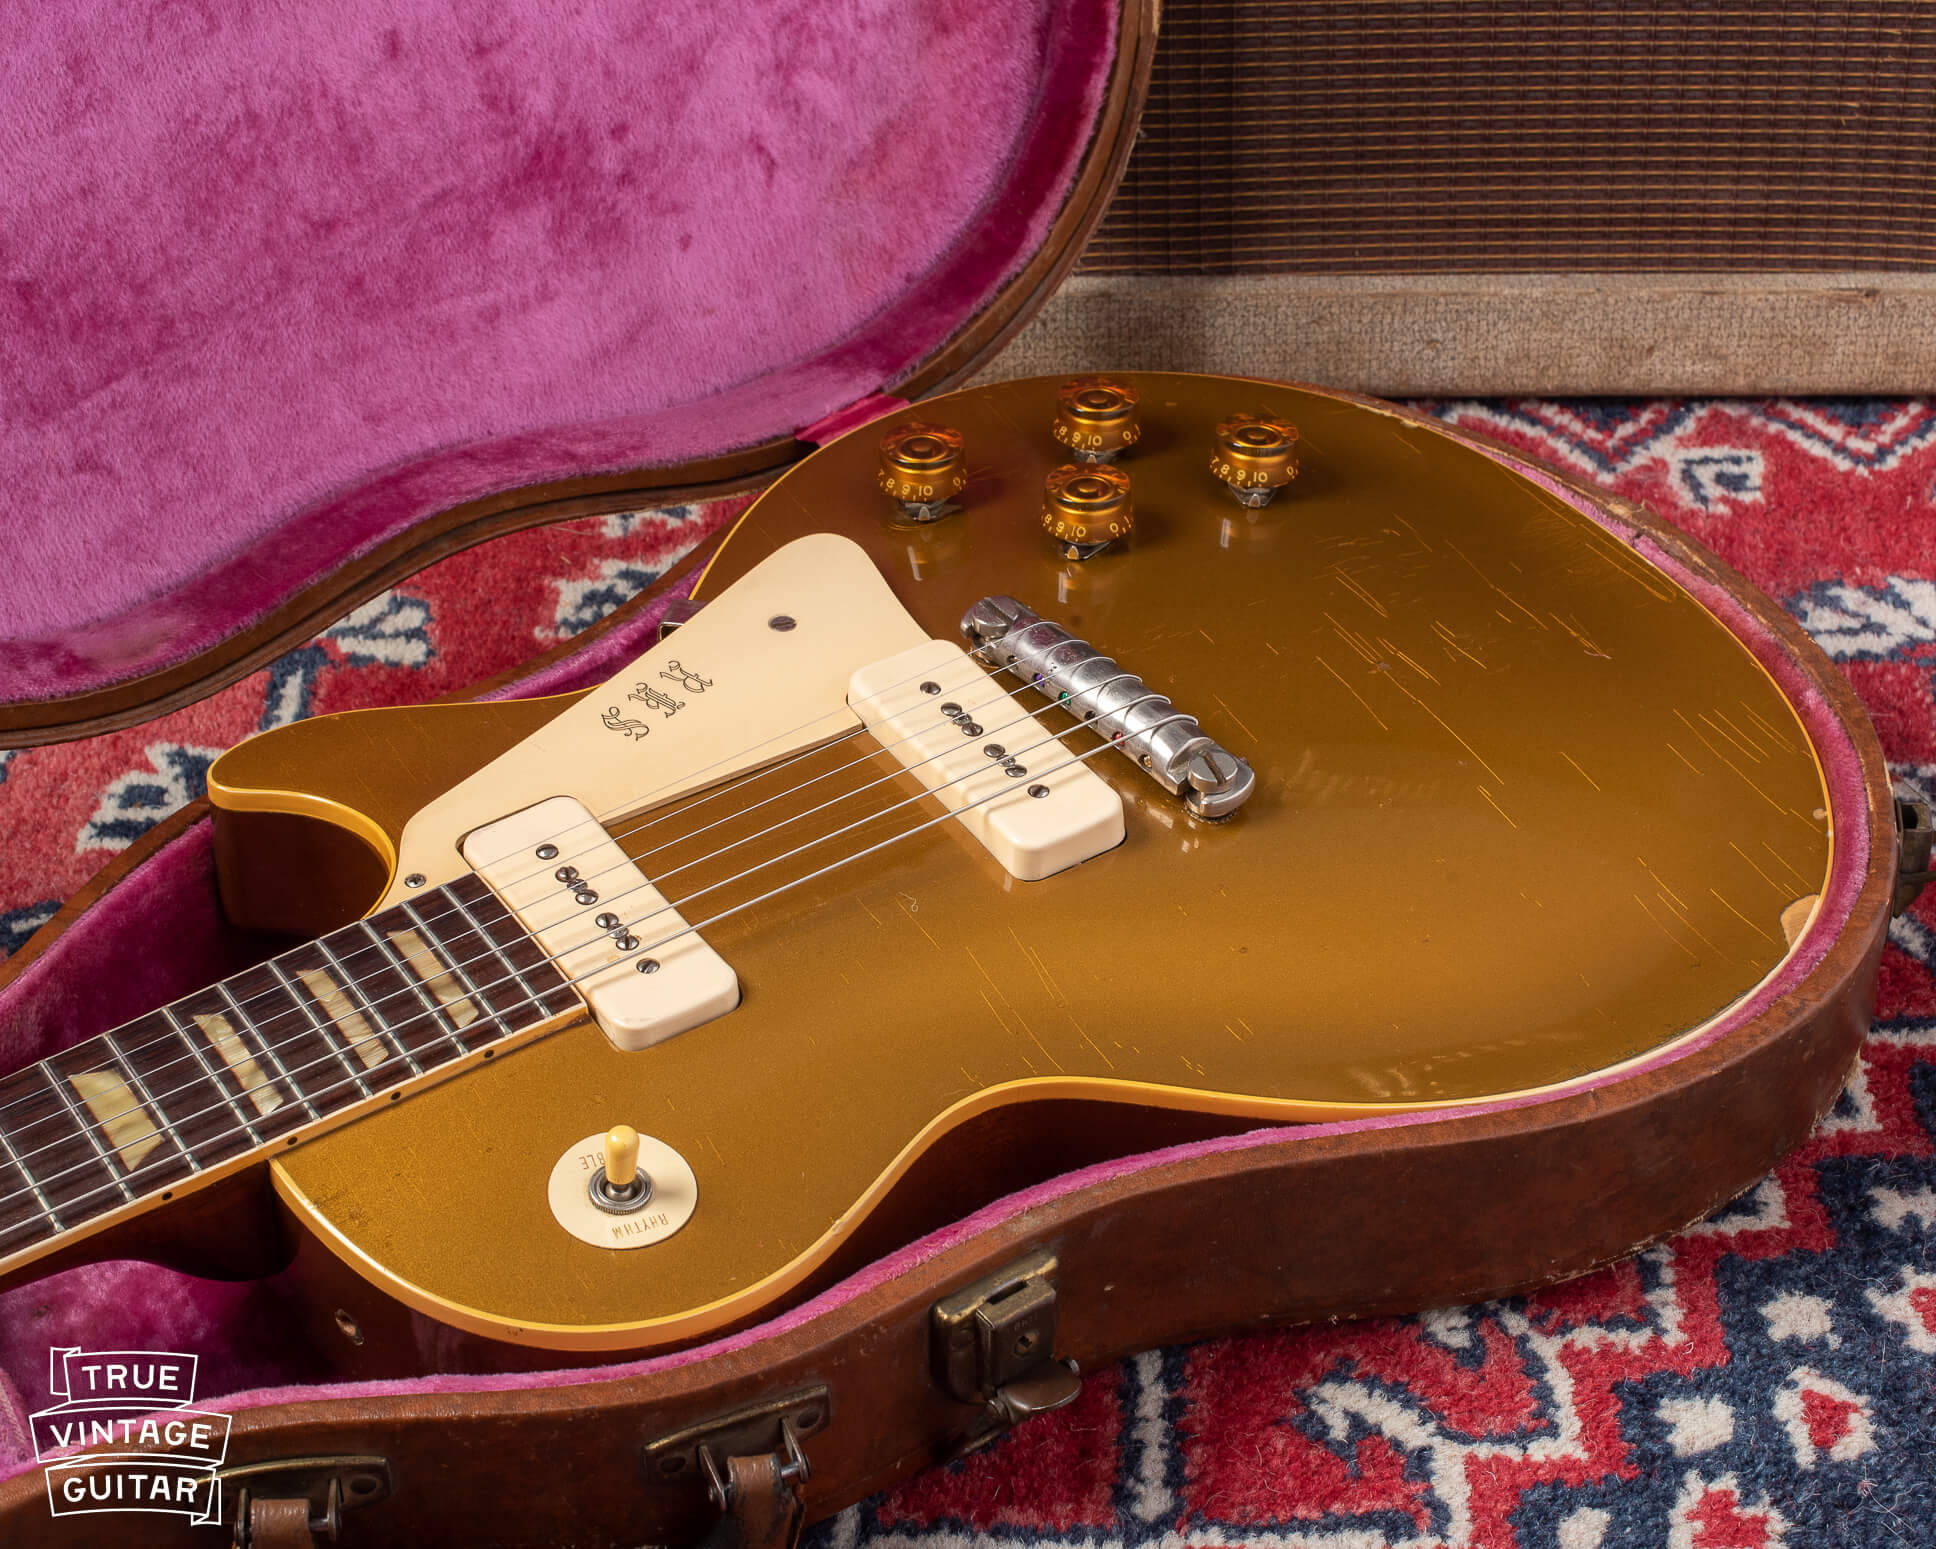 Finish checking on a 1954 Gibson Les Paul goldtop guitar